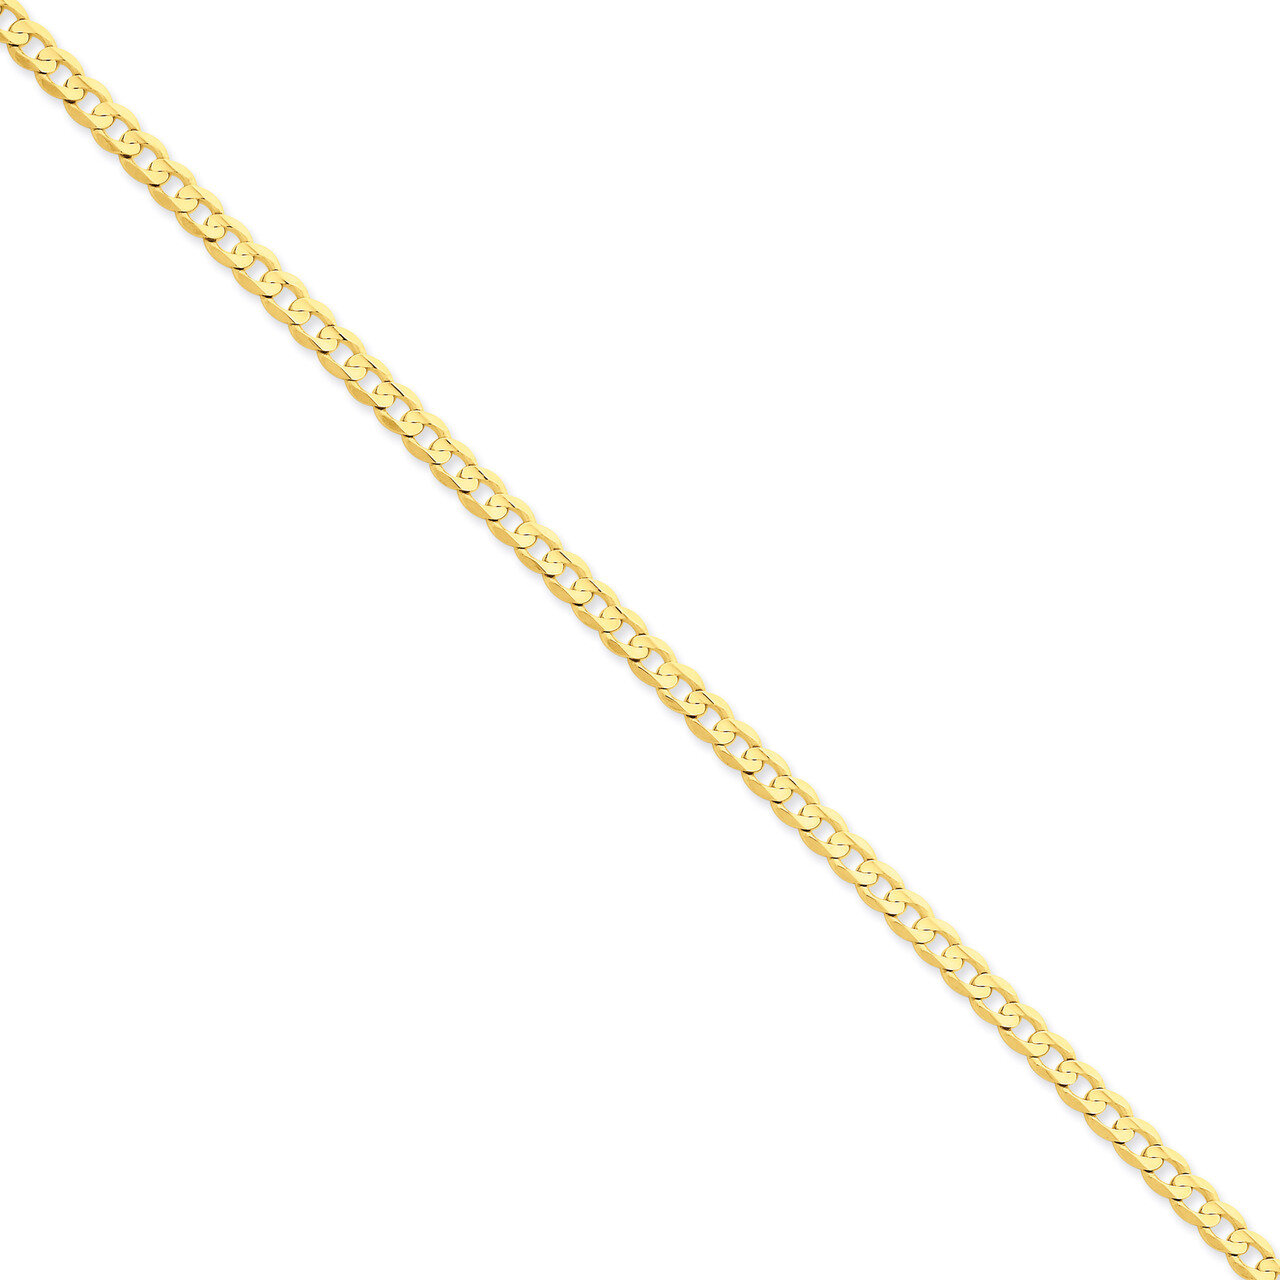 4.5mm Open Concave Curb Chain 8 Inch 14k Gold LCR120-8